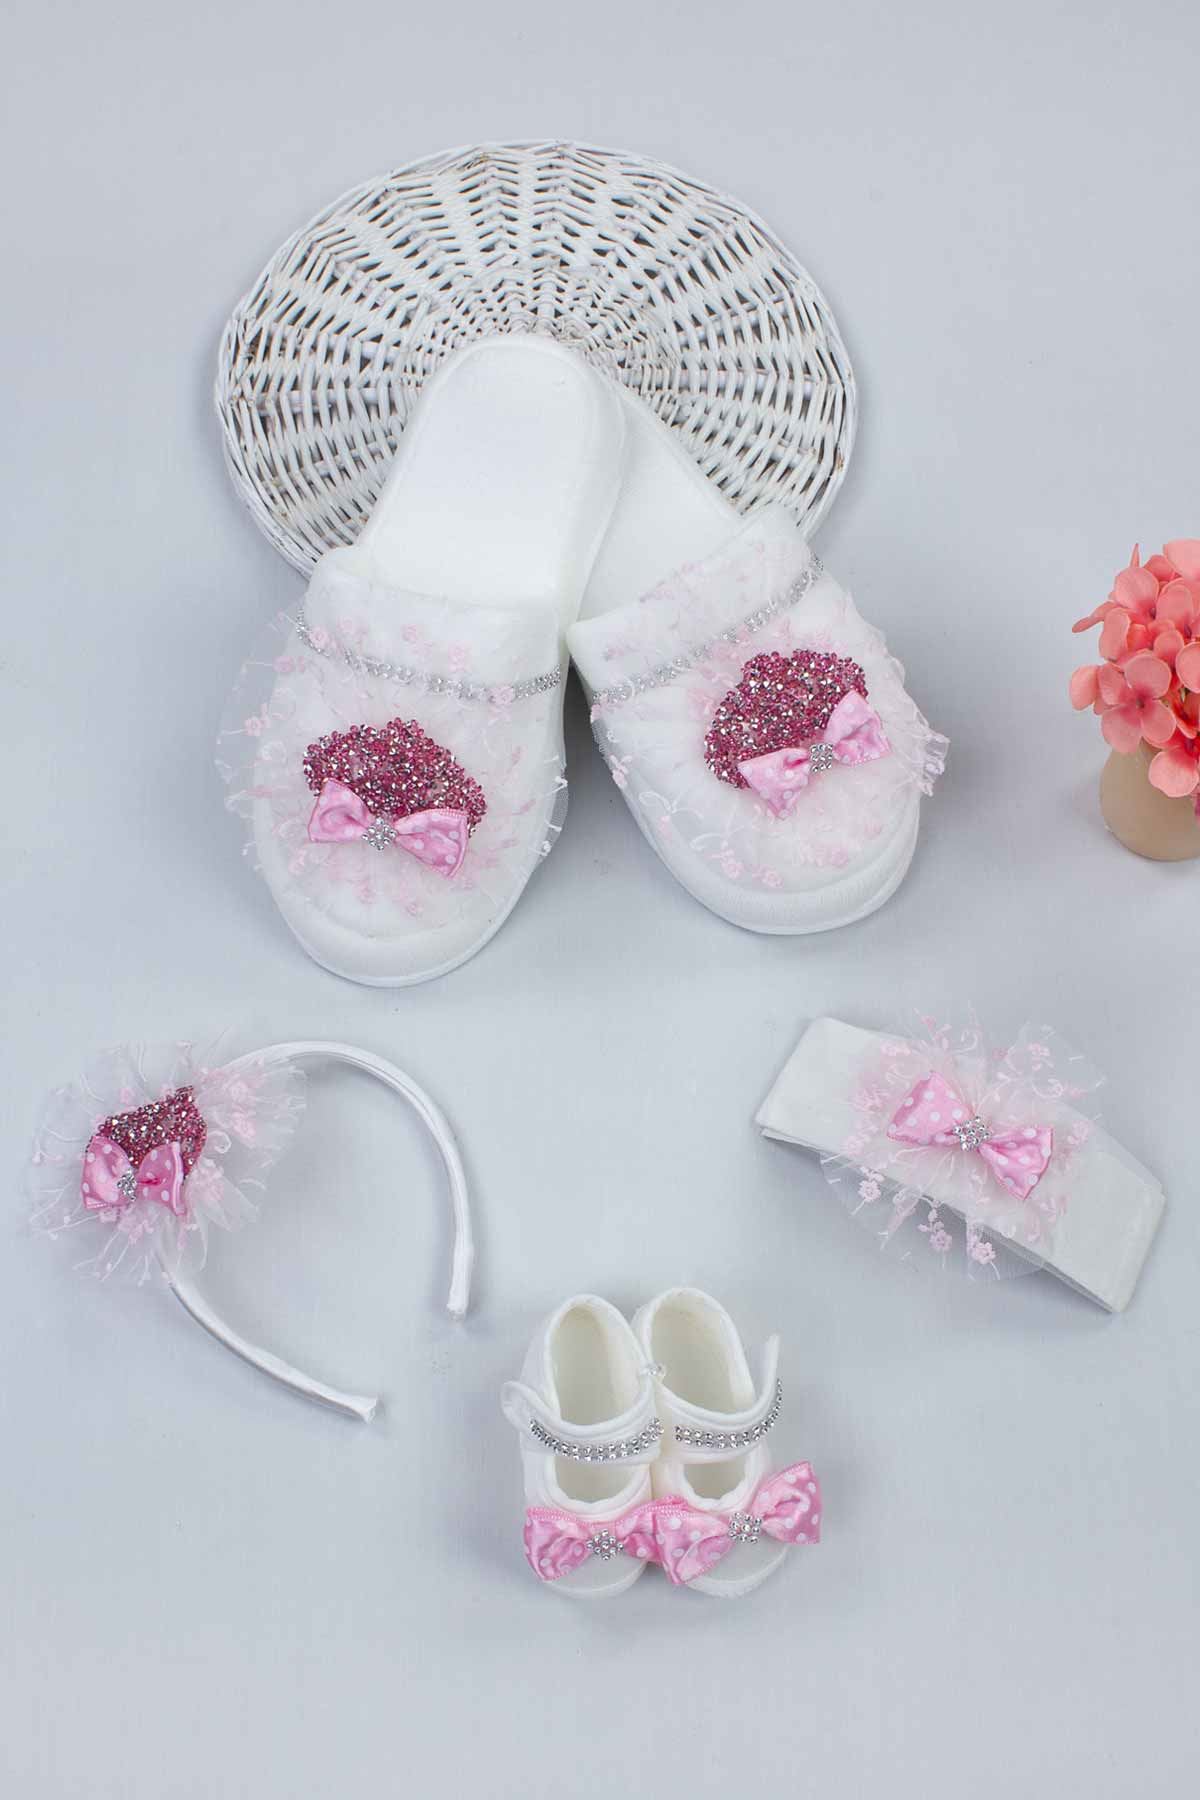 Fuchsia Puerperal Crown Slippers and Baby Booties Bandana Set